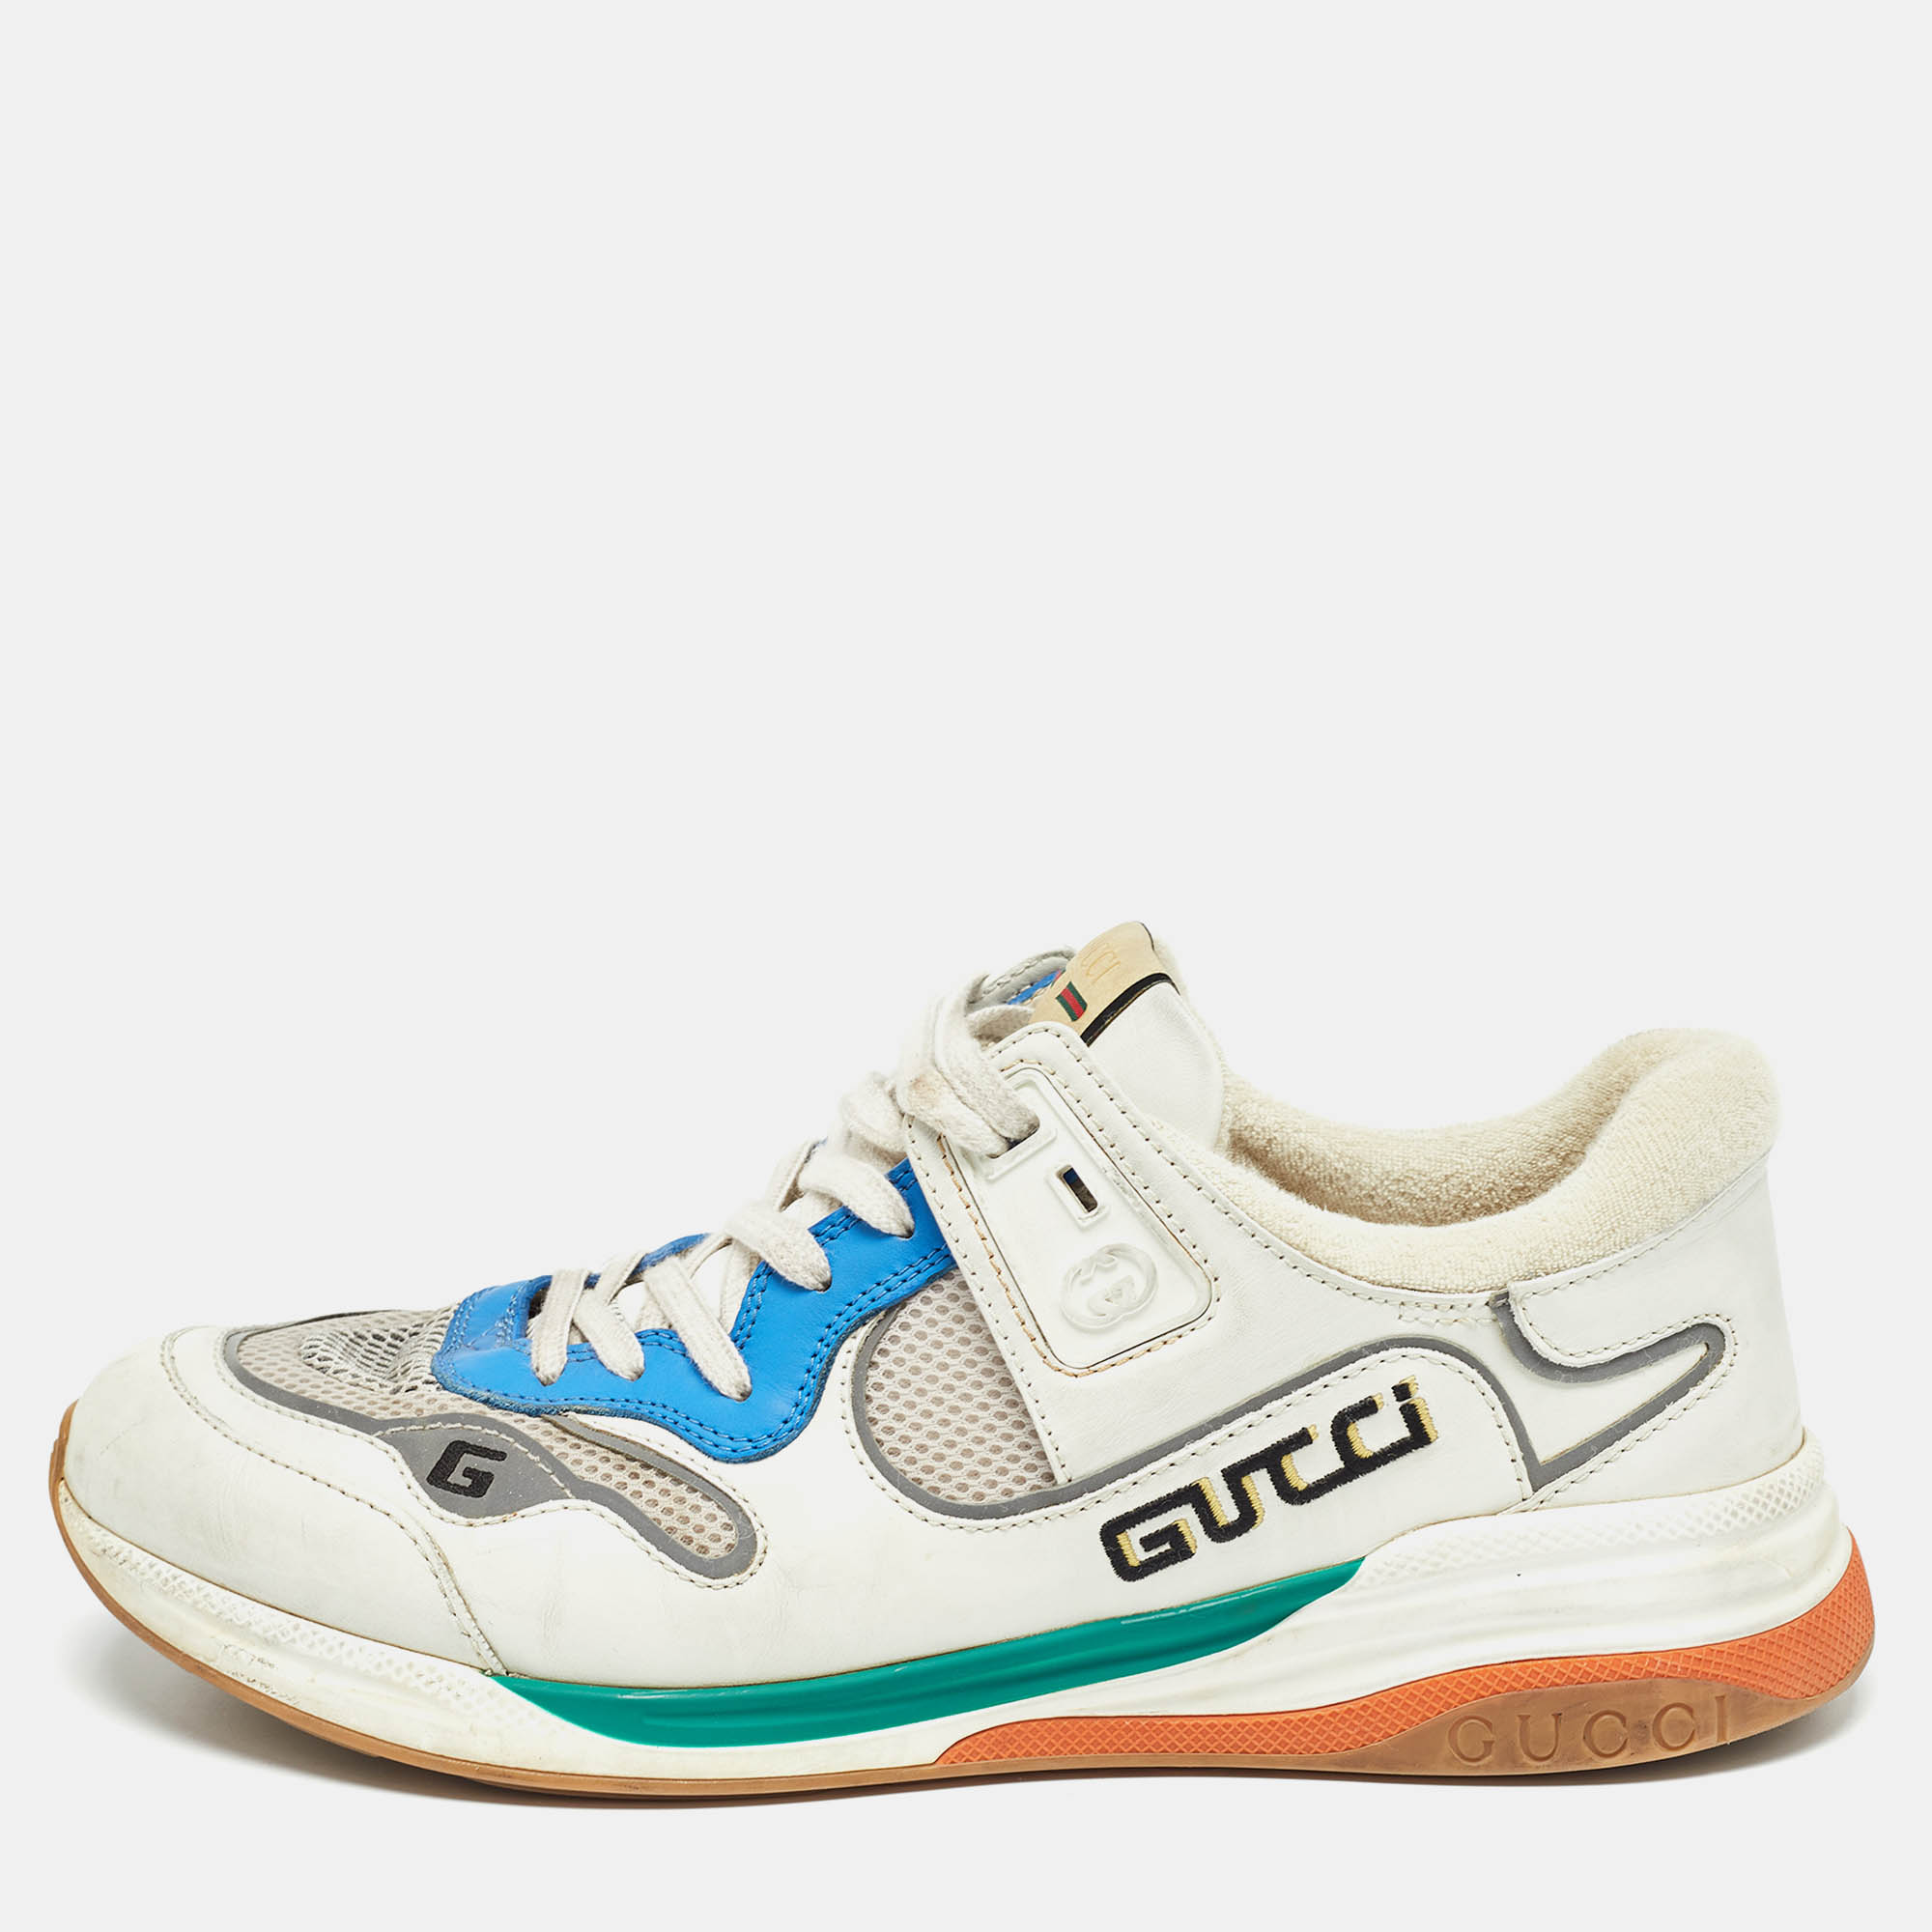 

Gucci Multicolor Leather and Mesh Ultrapace Sneakers Size 46.5